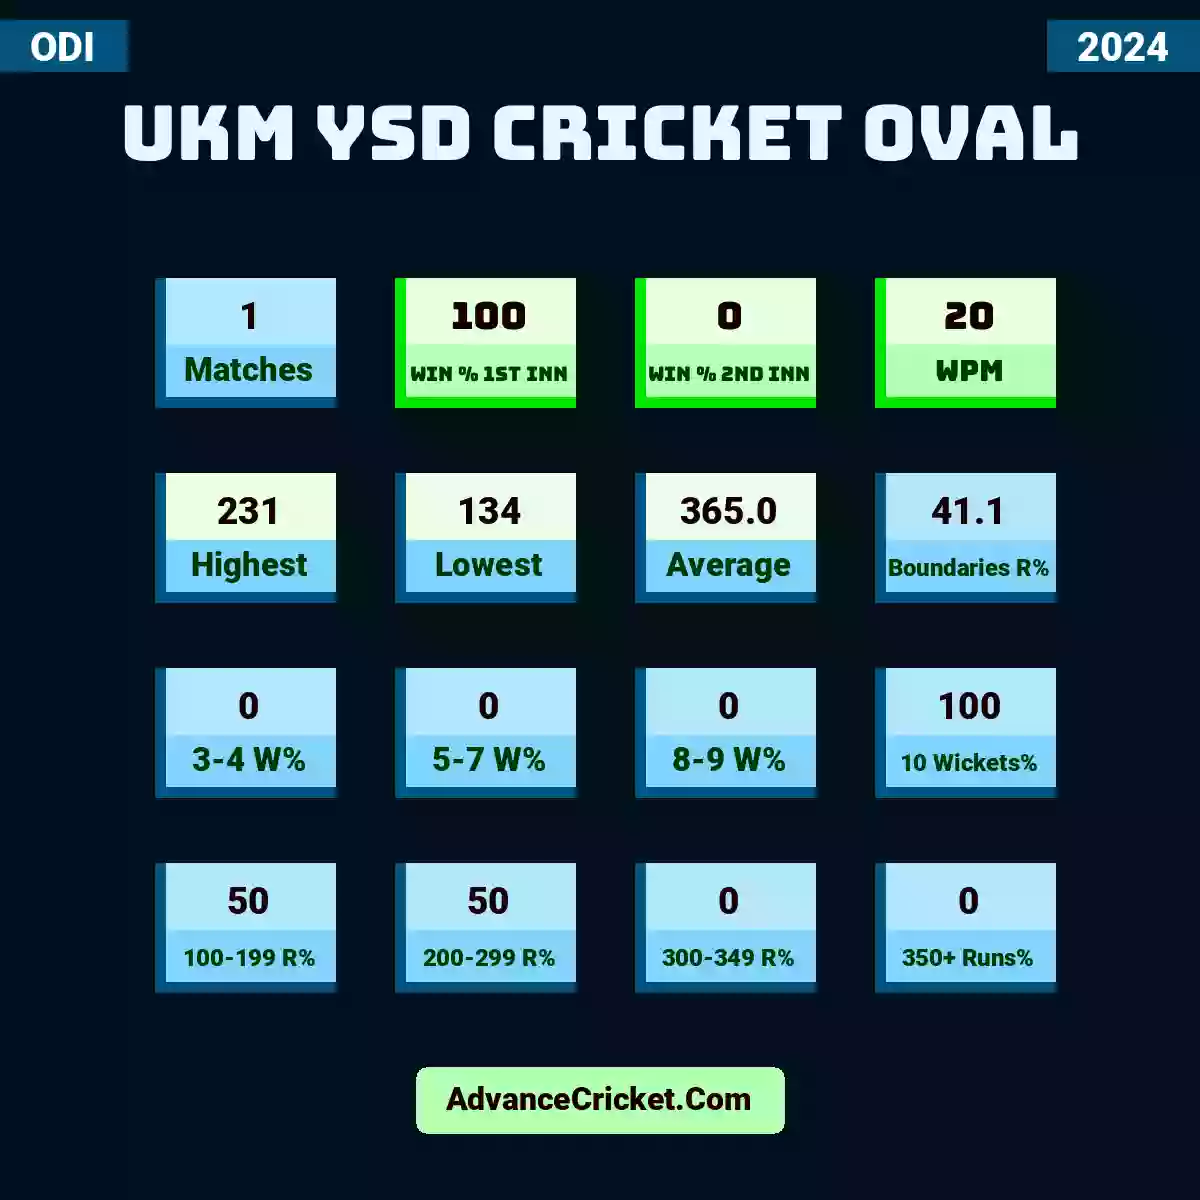 Image showing UKM YSD Cricket Oval with Matches: 1, Win % 1st Inn: 100, Win % 2nd Inn: 0, WPM: 20, Highest: 231, Lowest: 134, Average: 365.0, Boundaries R%: 41.1, 3-4 W%: 0, 5-7 W%: 0, 8-9 W%: 0, 10 Wickets%: 100, 100-199 R%: 50, 200-299 R%: 50, 300-349 R%: 0, 350+ Runs%: 0.